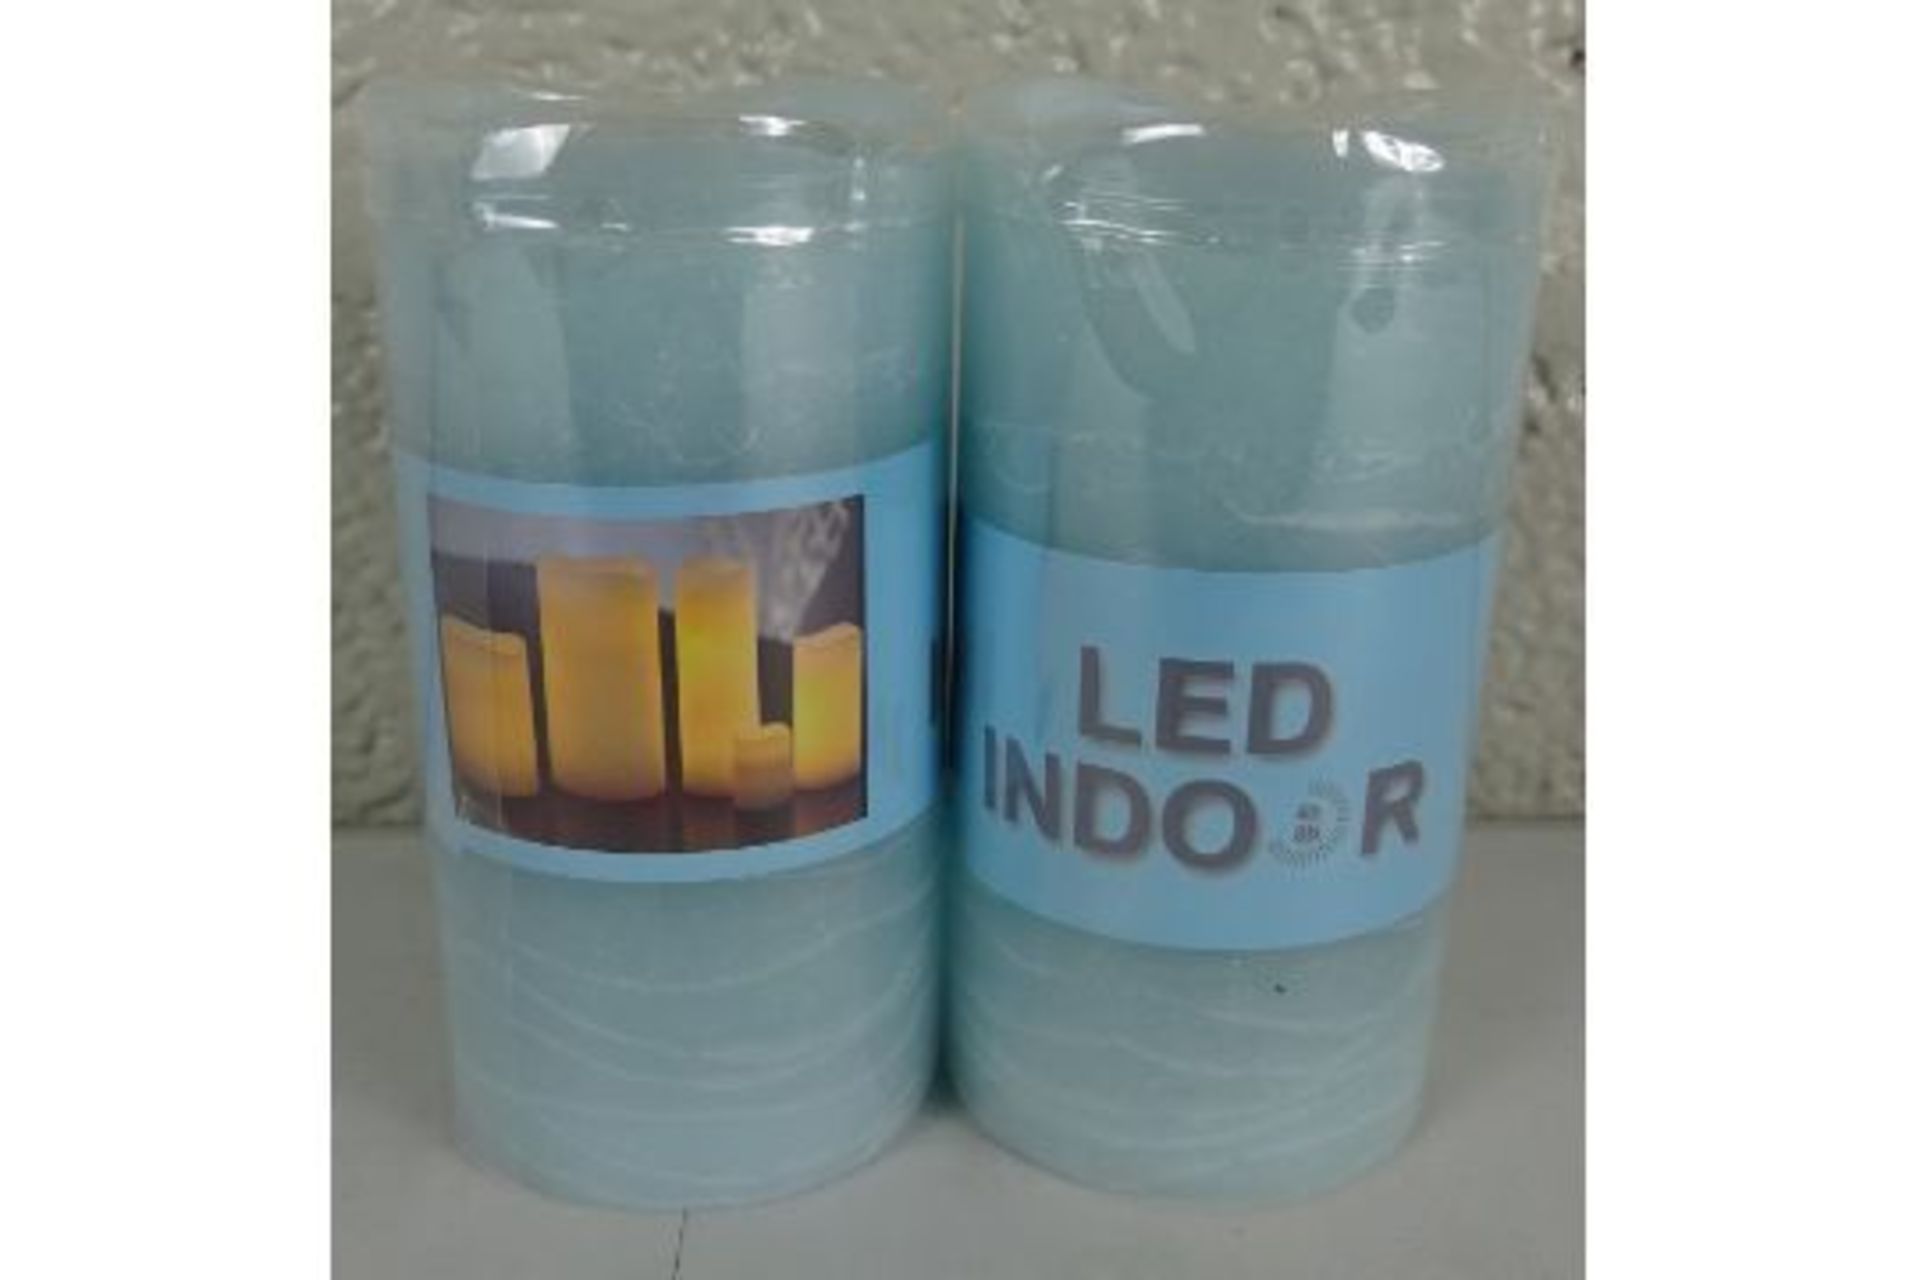 BRAND NEW BLUE WAX LED INDOOR BATTERY POWERED CANDLES X2.